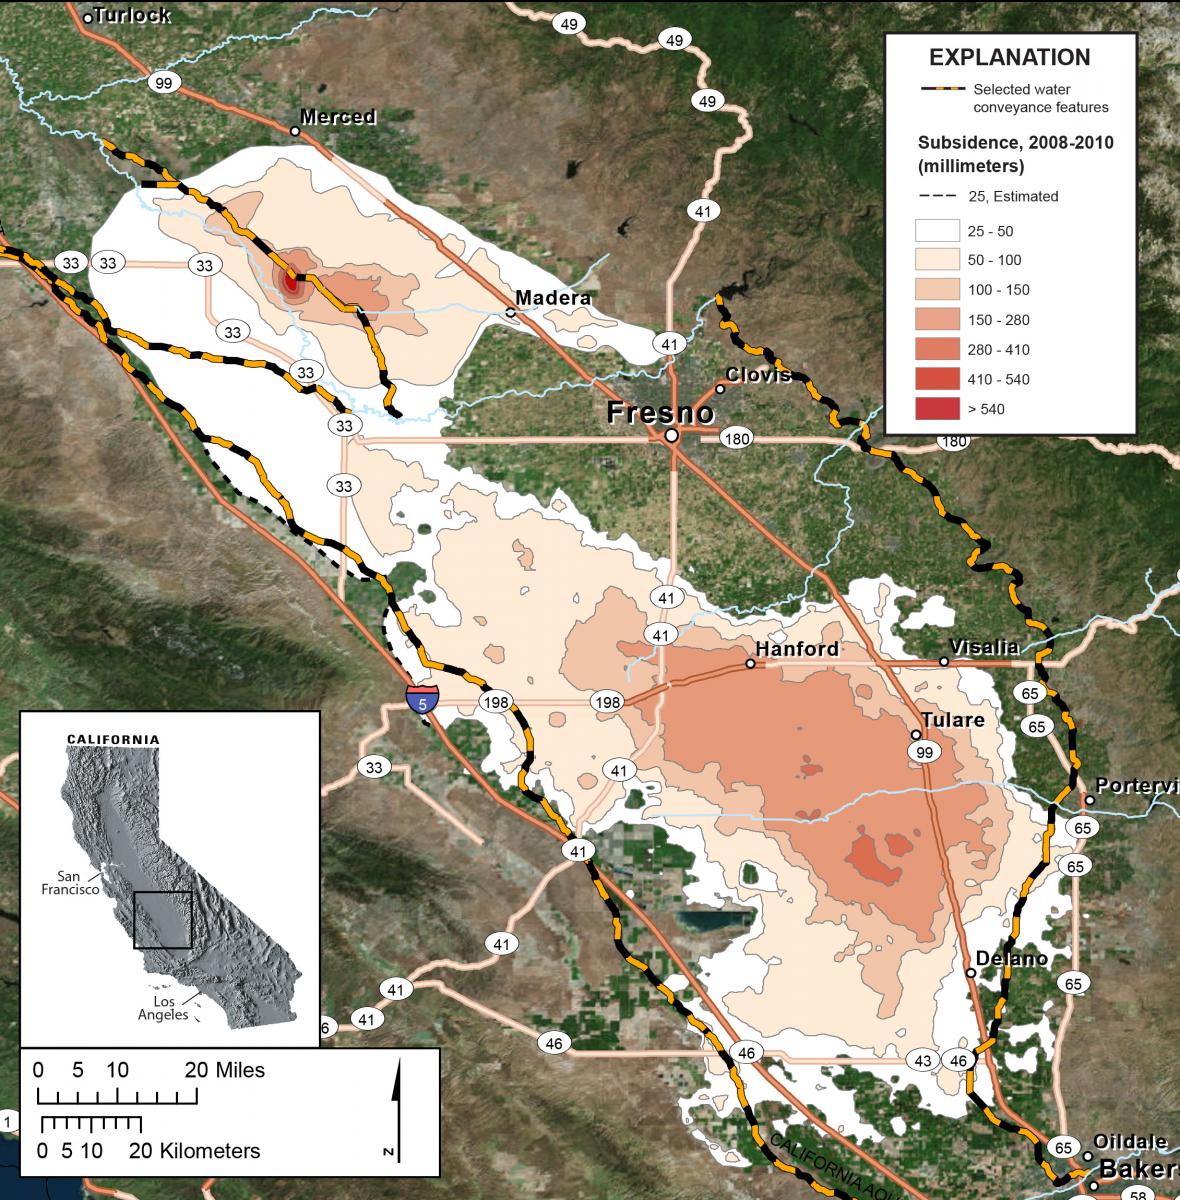 Subsidence contours derived from interferograms generated from the Advanced Land Observing Satellite (ALOS) and the Environmental Satellite (ENVISAT) showing subsidence in the San Joaquin Valley, California, during 2008–2010.